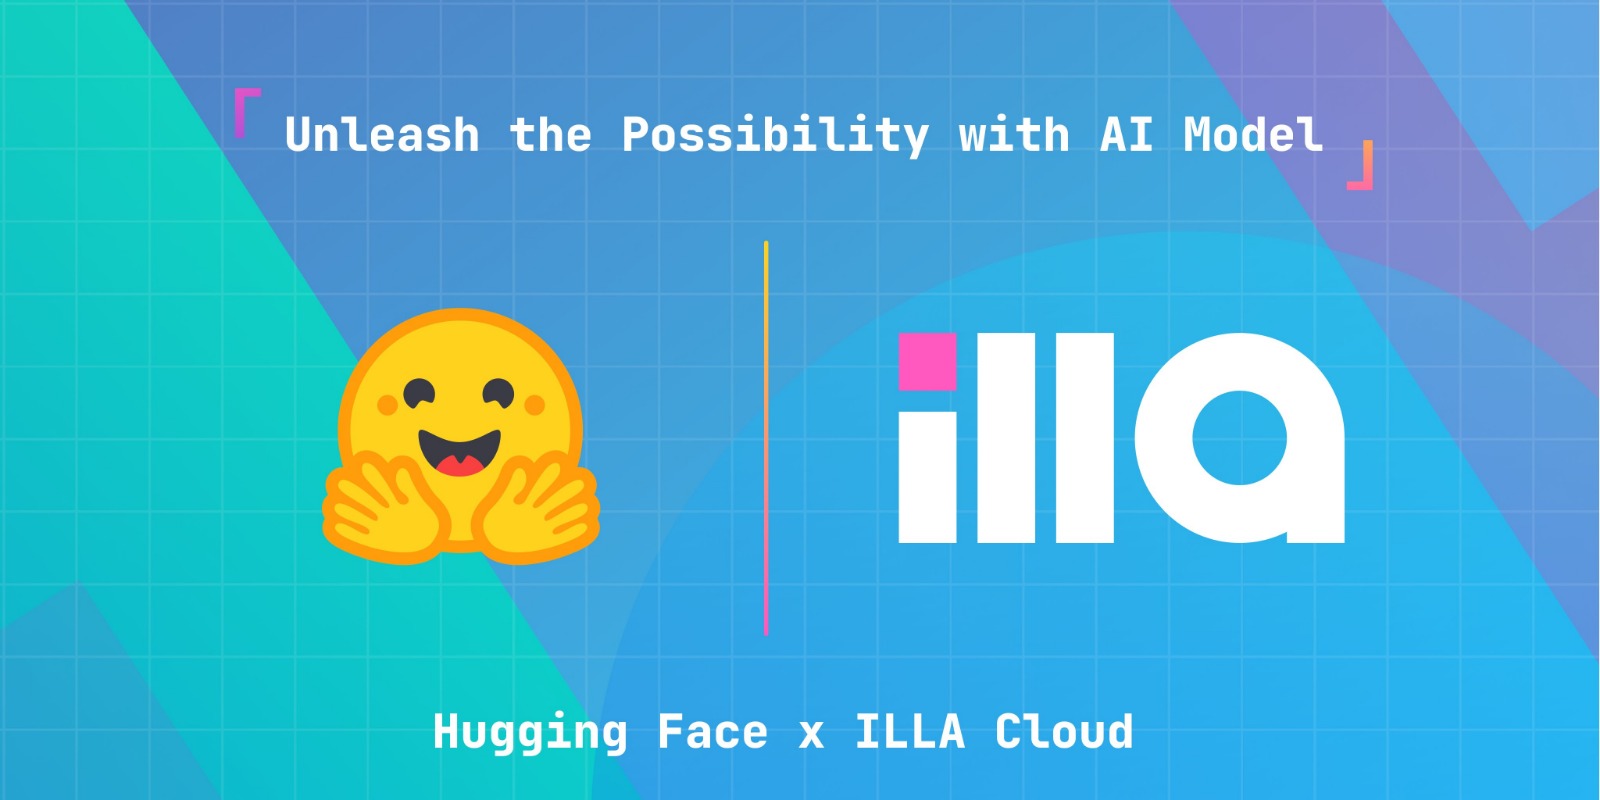 ILLA Cloud: Building Internal Tools Faster and Easier in 20 Languages